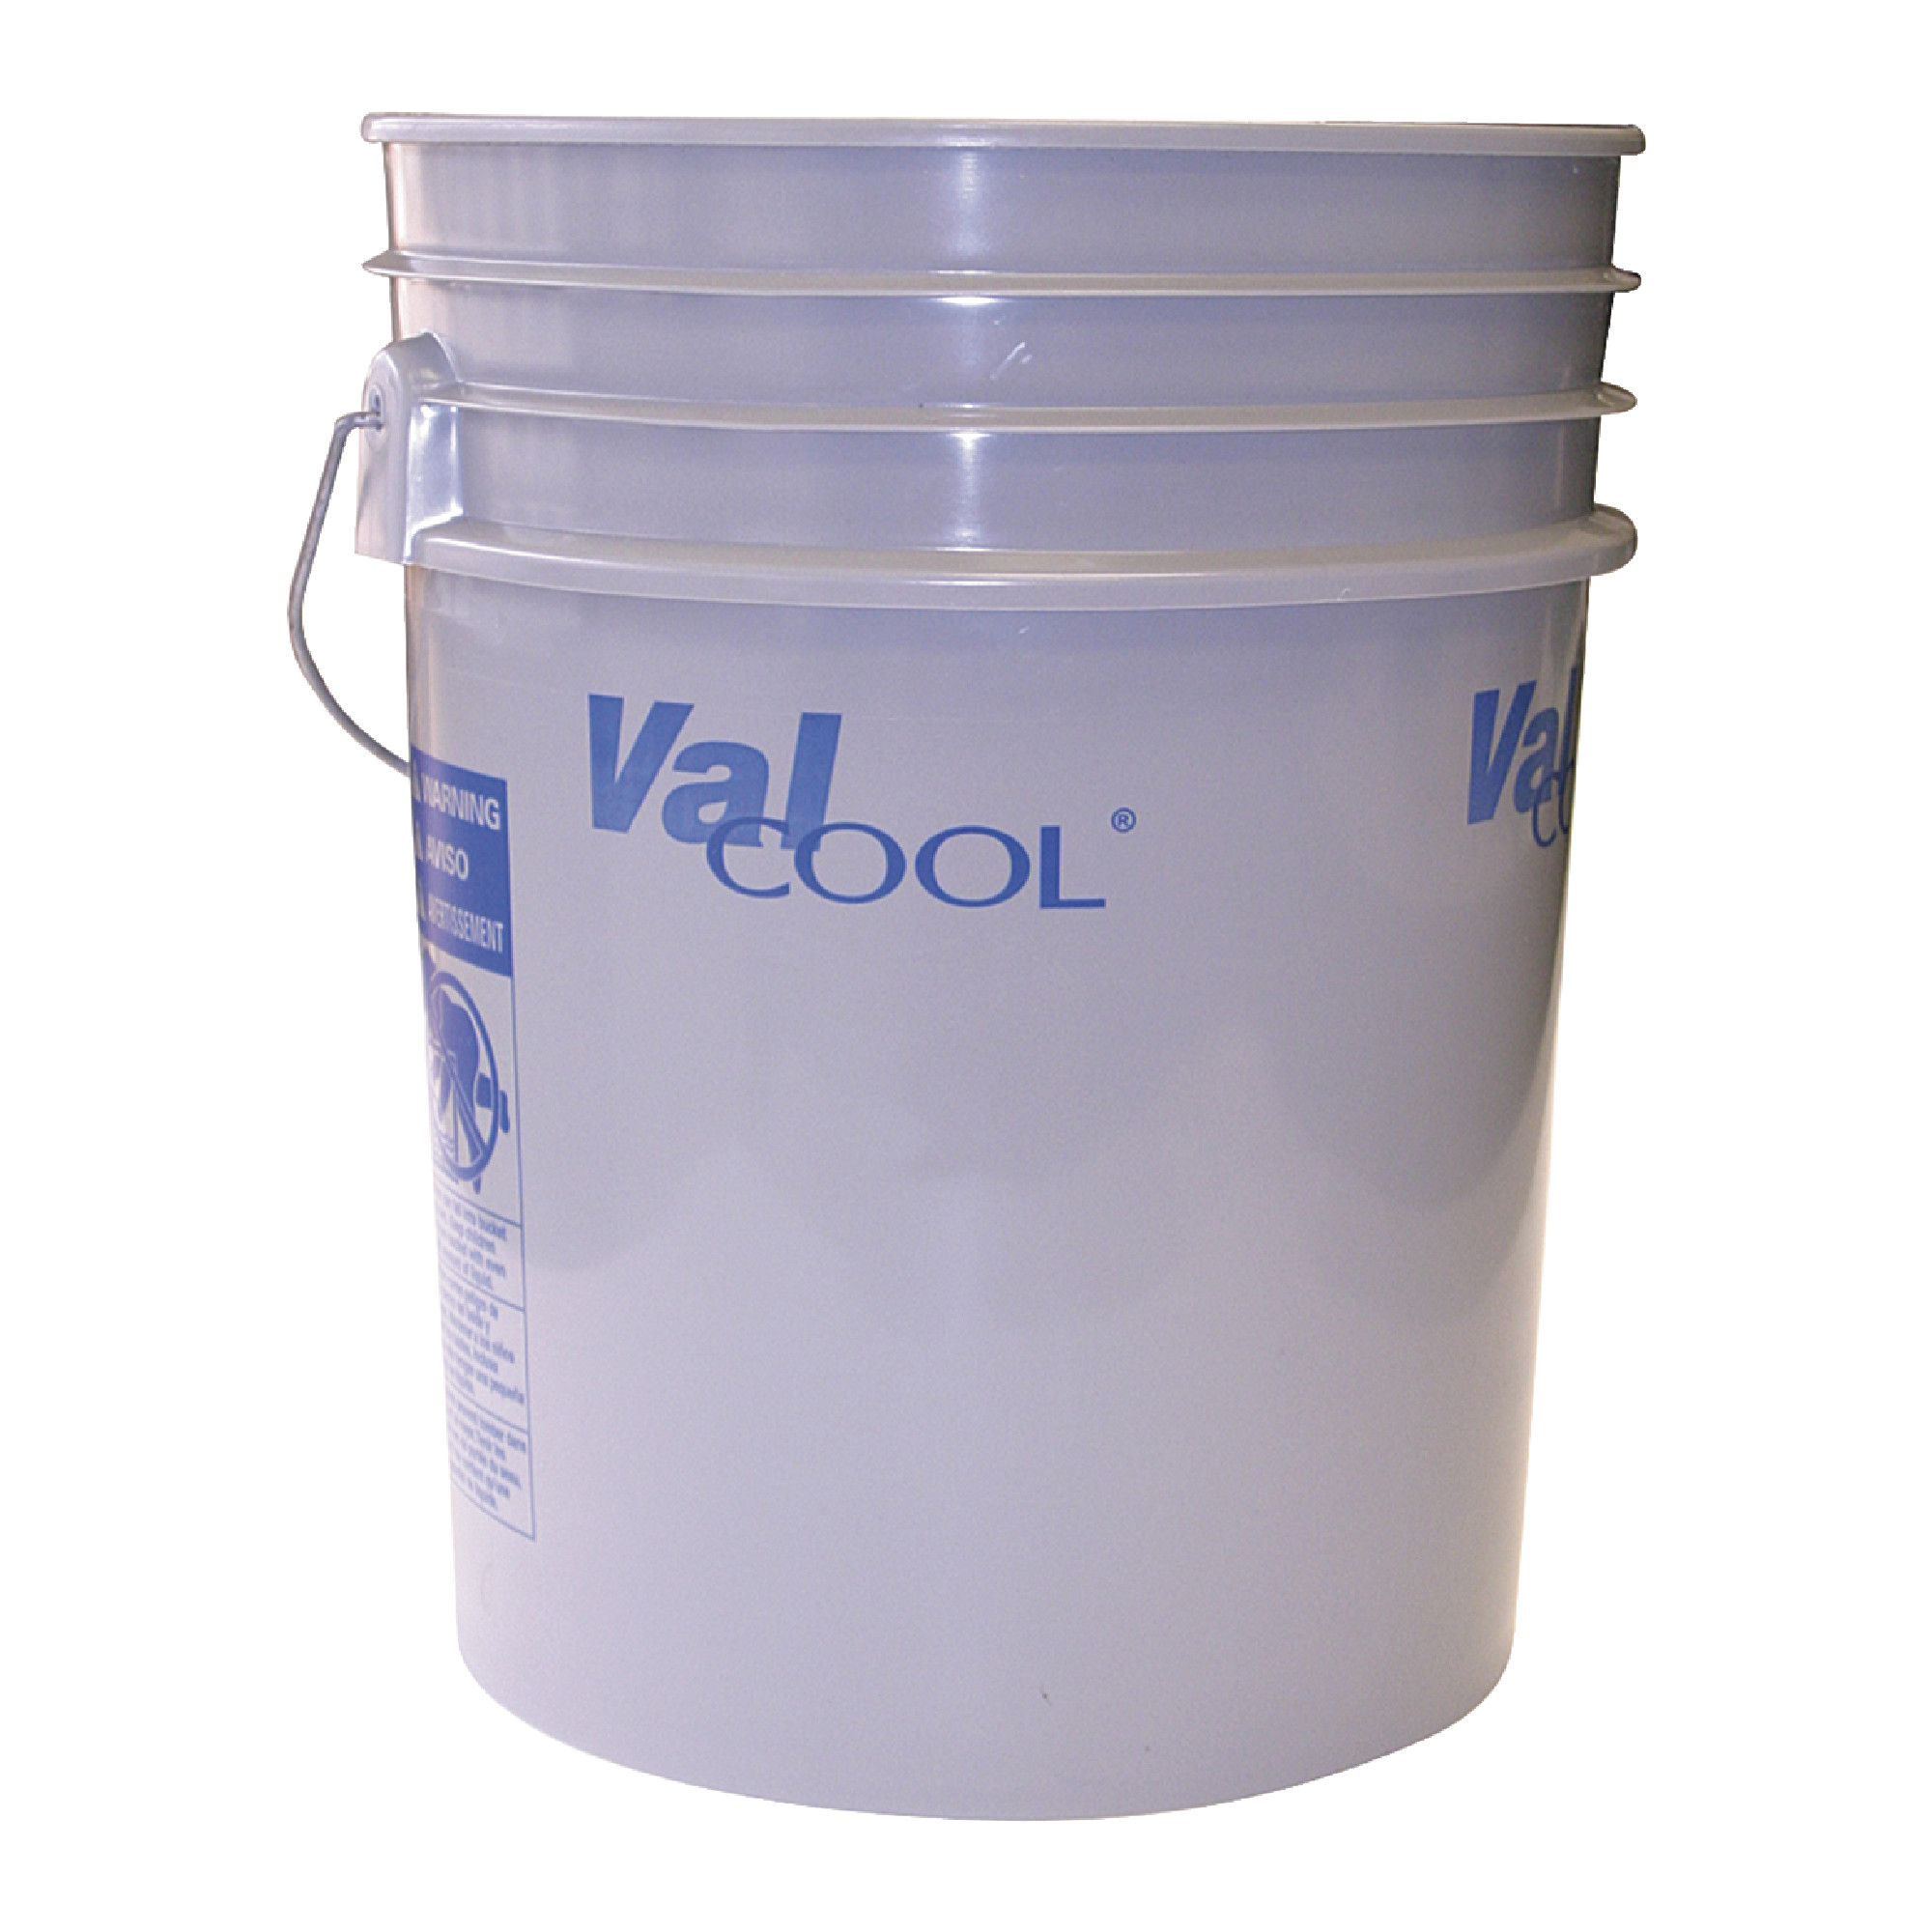 VALCOOL Val-Lube EP 100 EP Gear Oil